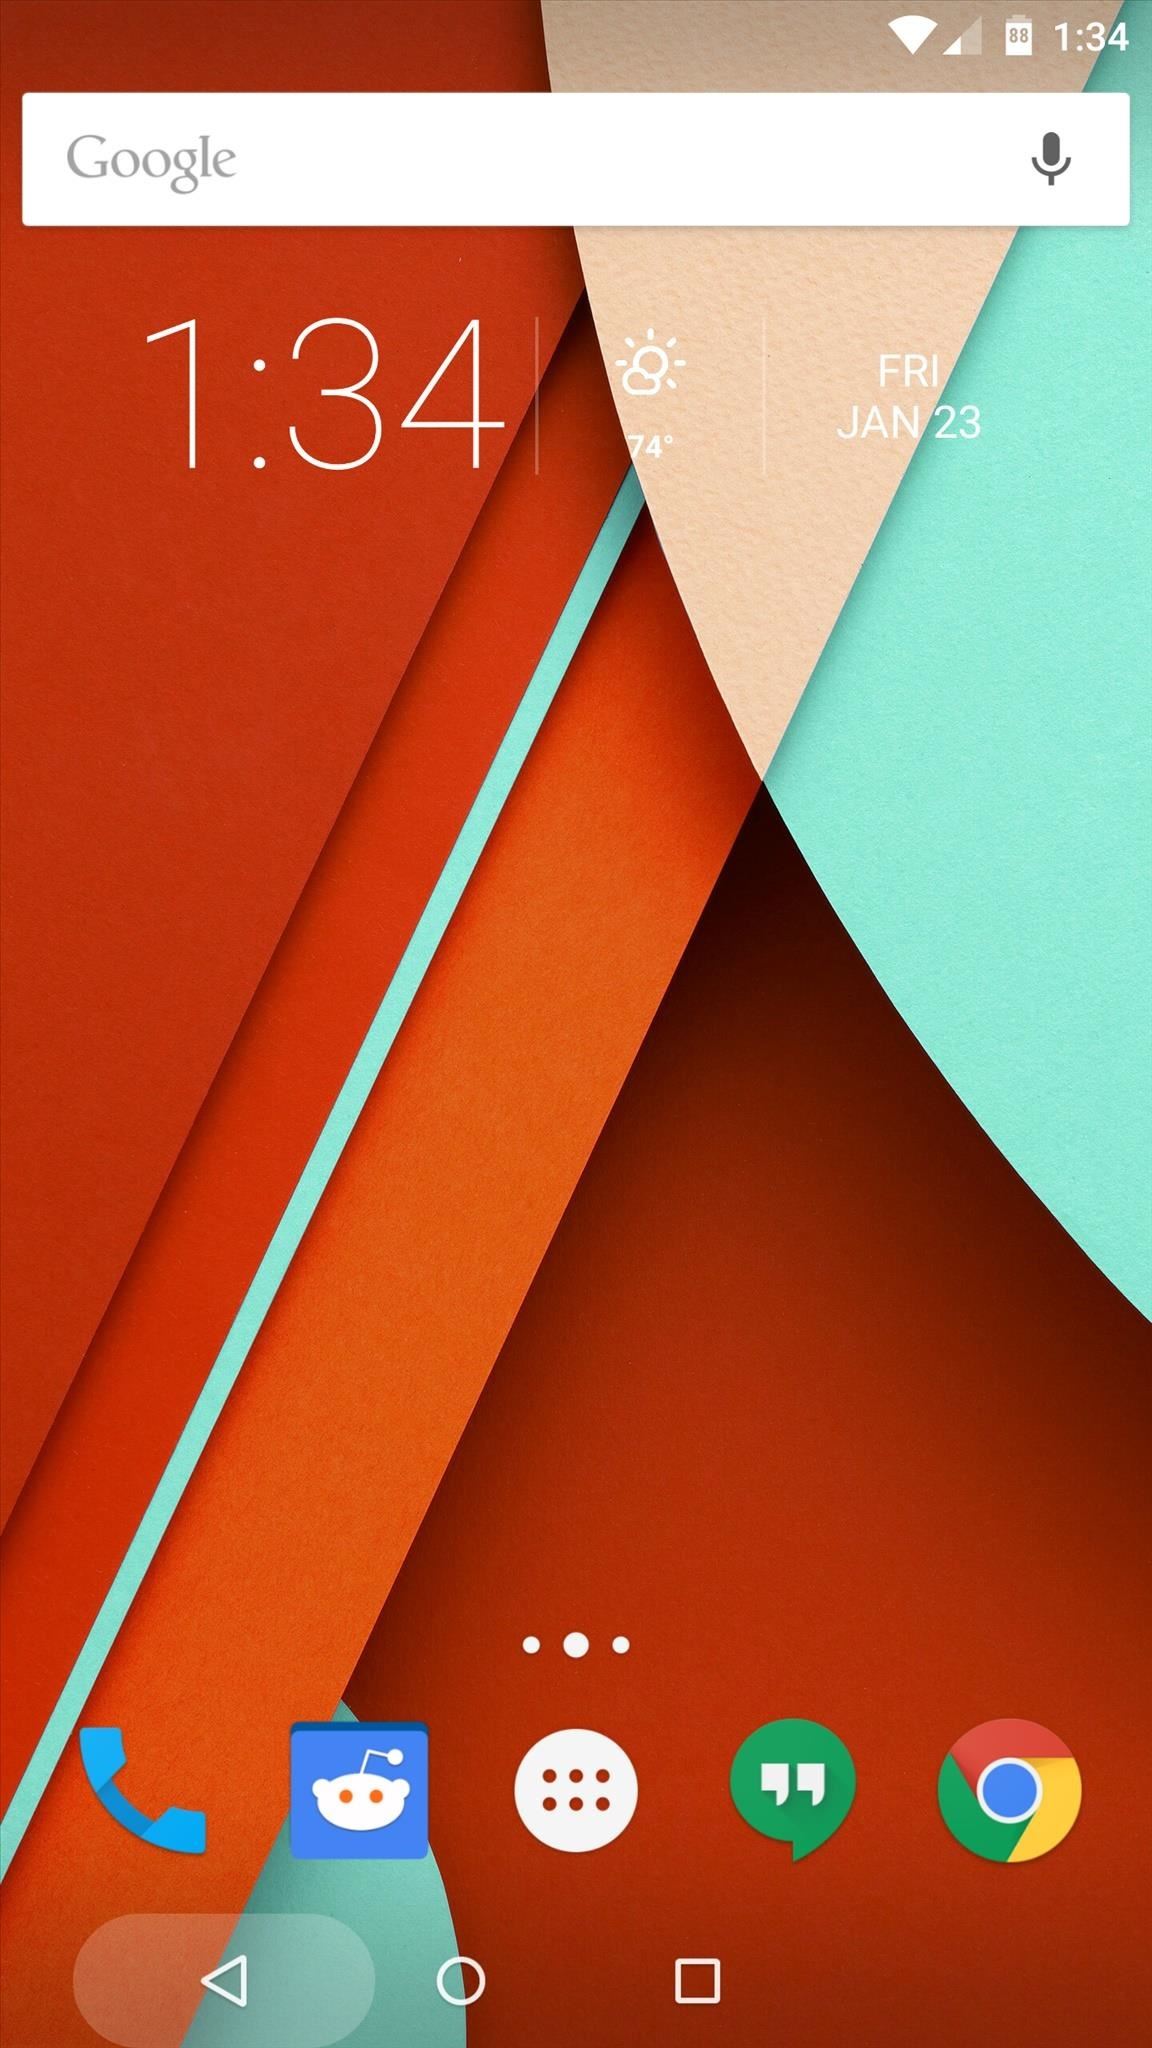 Get Custom ROM Options on Your Nexus Without Installing a Custom ROM